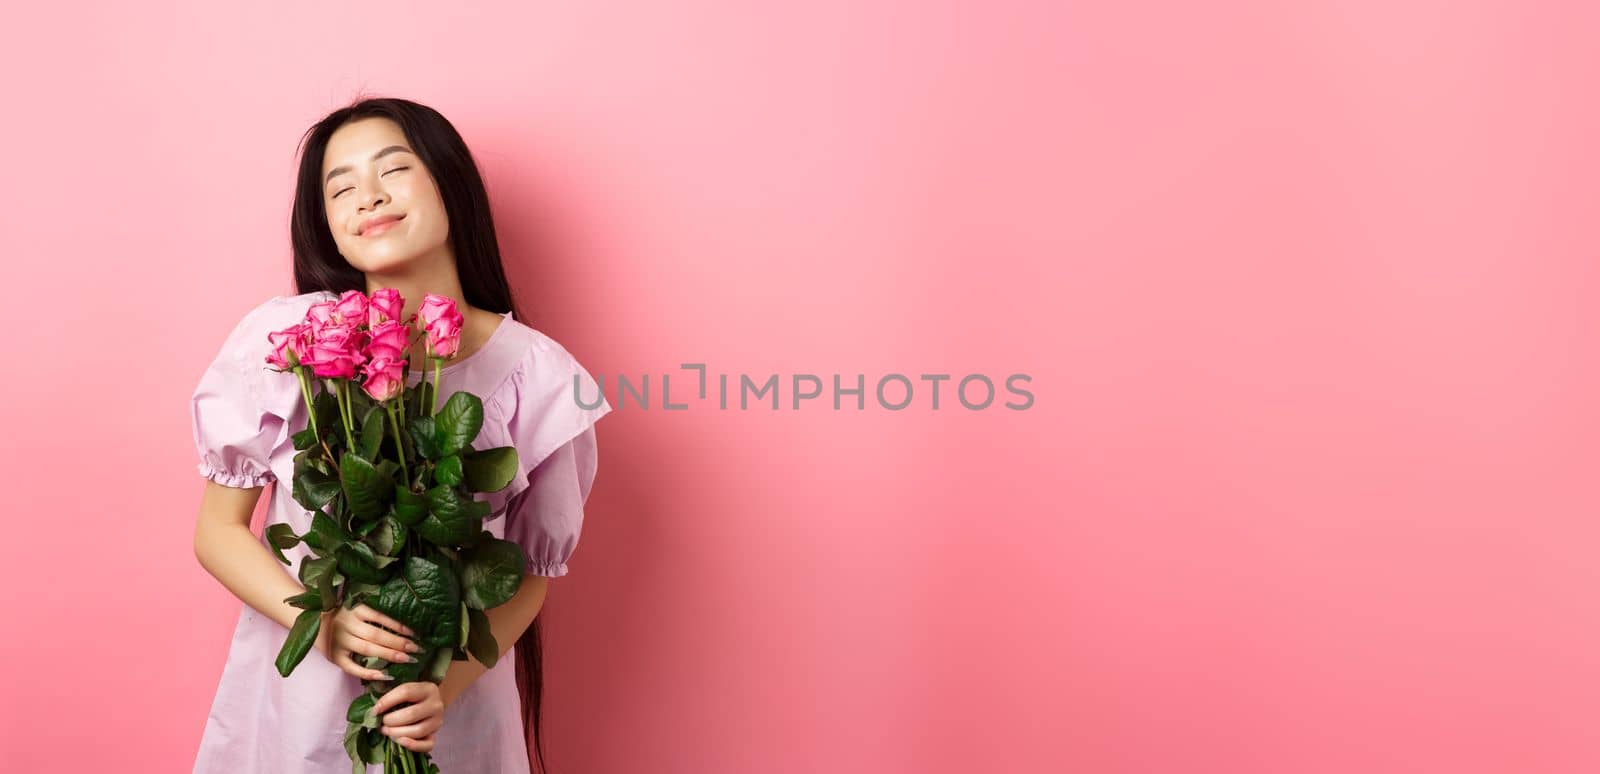 Dreamy asian teenage girl feeling romantic, holding flowers and dreaming, imaging valentines day date, wearing cute dress, standing on pink background.